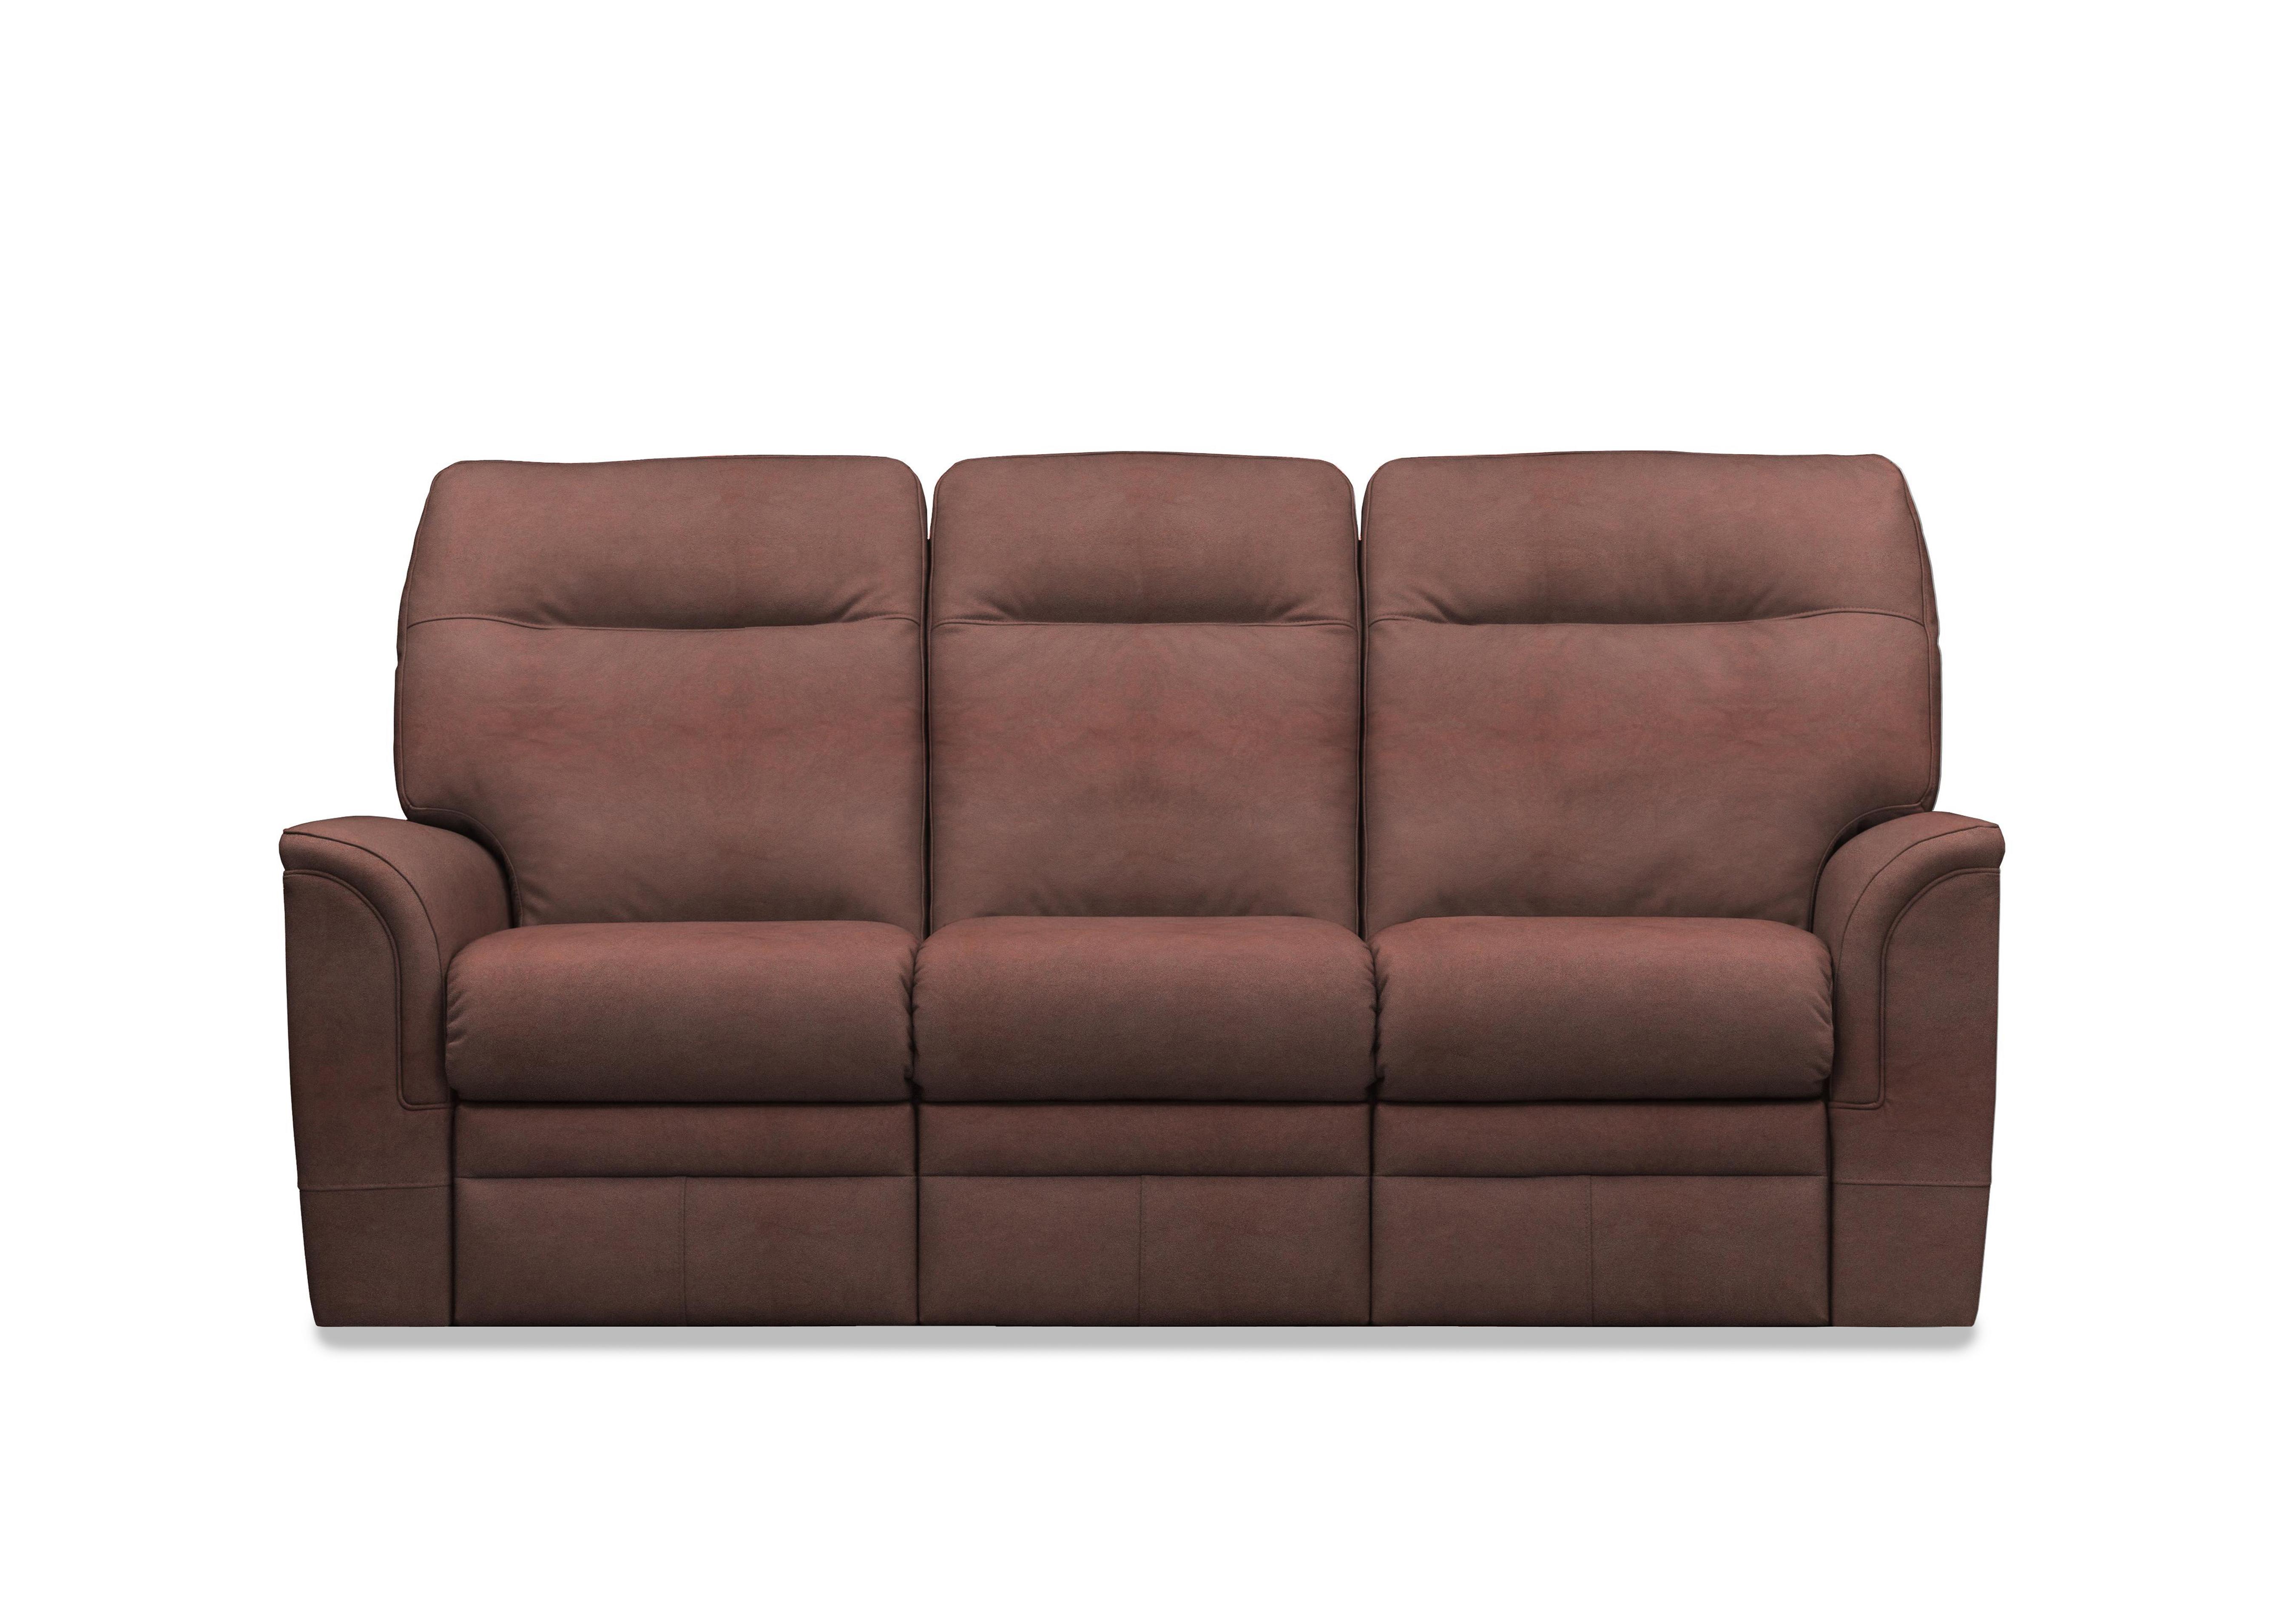 Hudson 23 Leather 3 Seater Sofa in Revolution Chocolate 009027-00 on Furniture Village